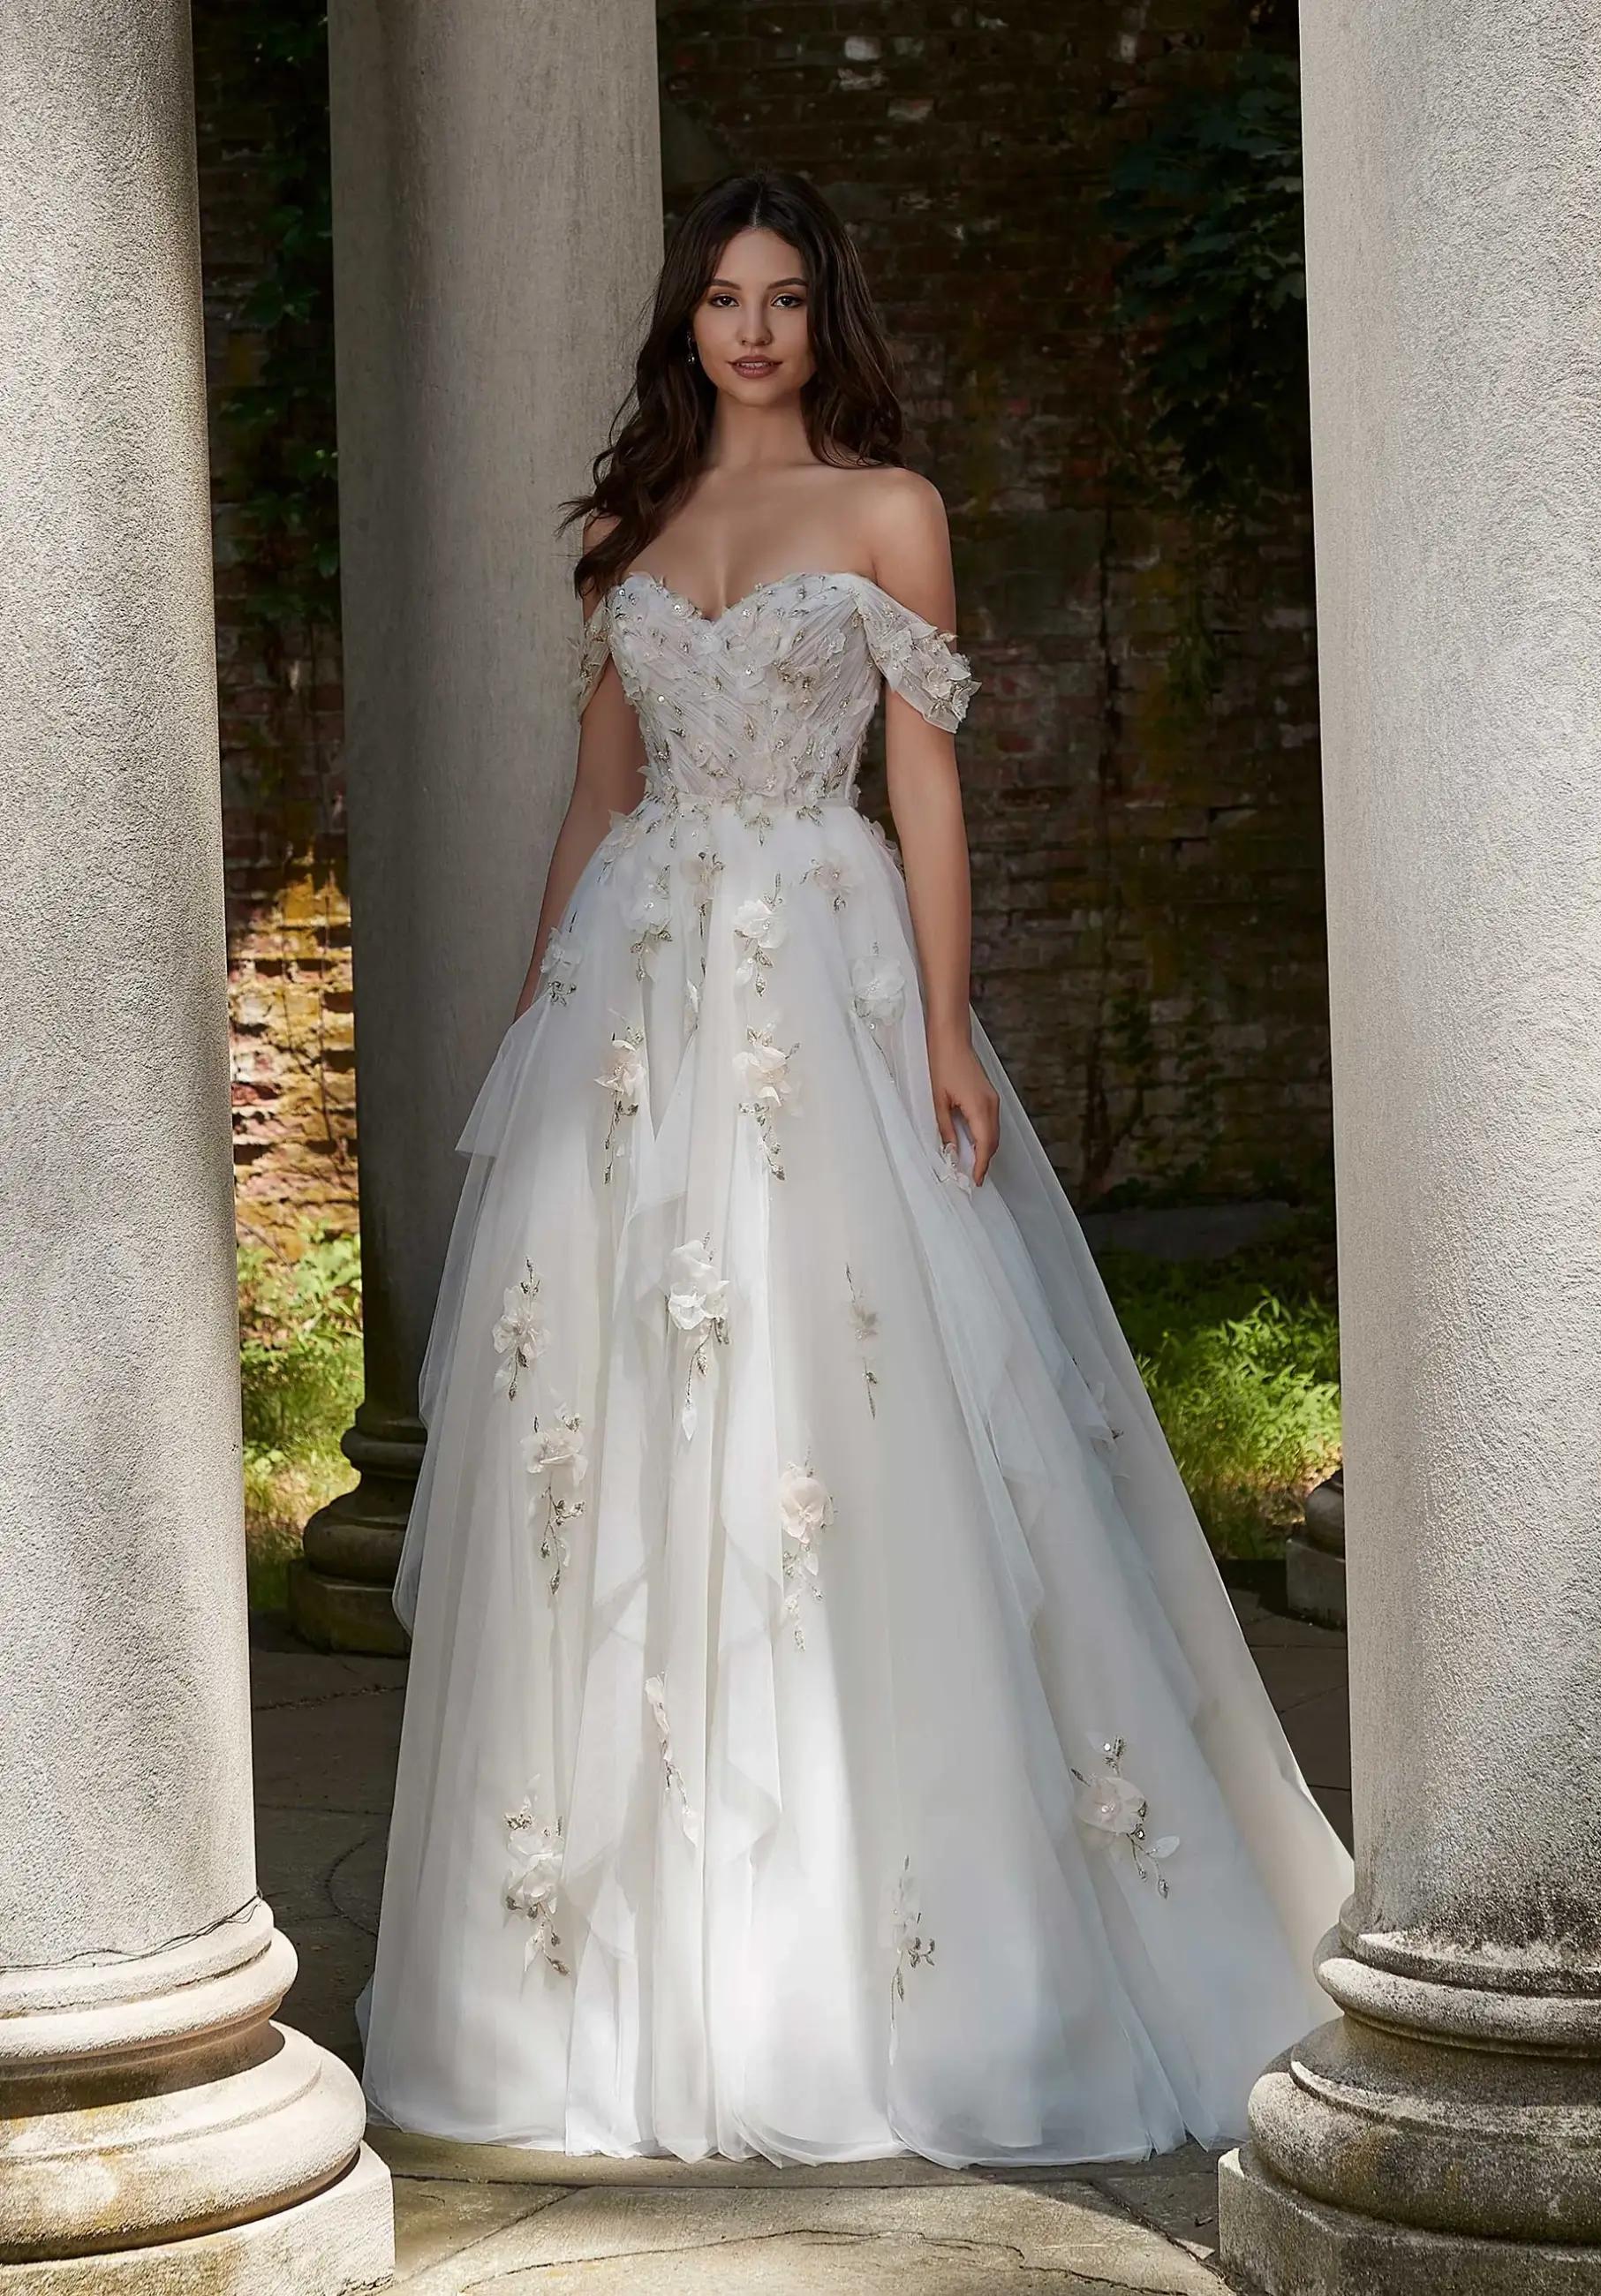 Top 5 Wedding Gown Styles for Spring Weddings Image